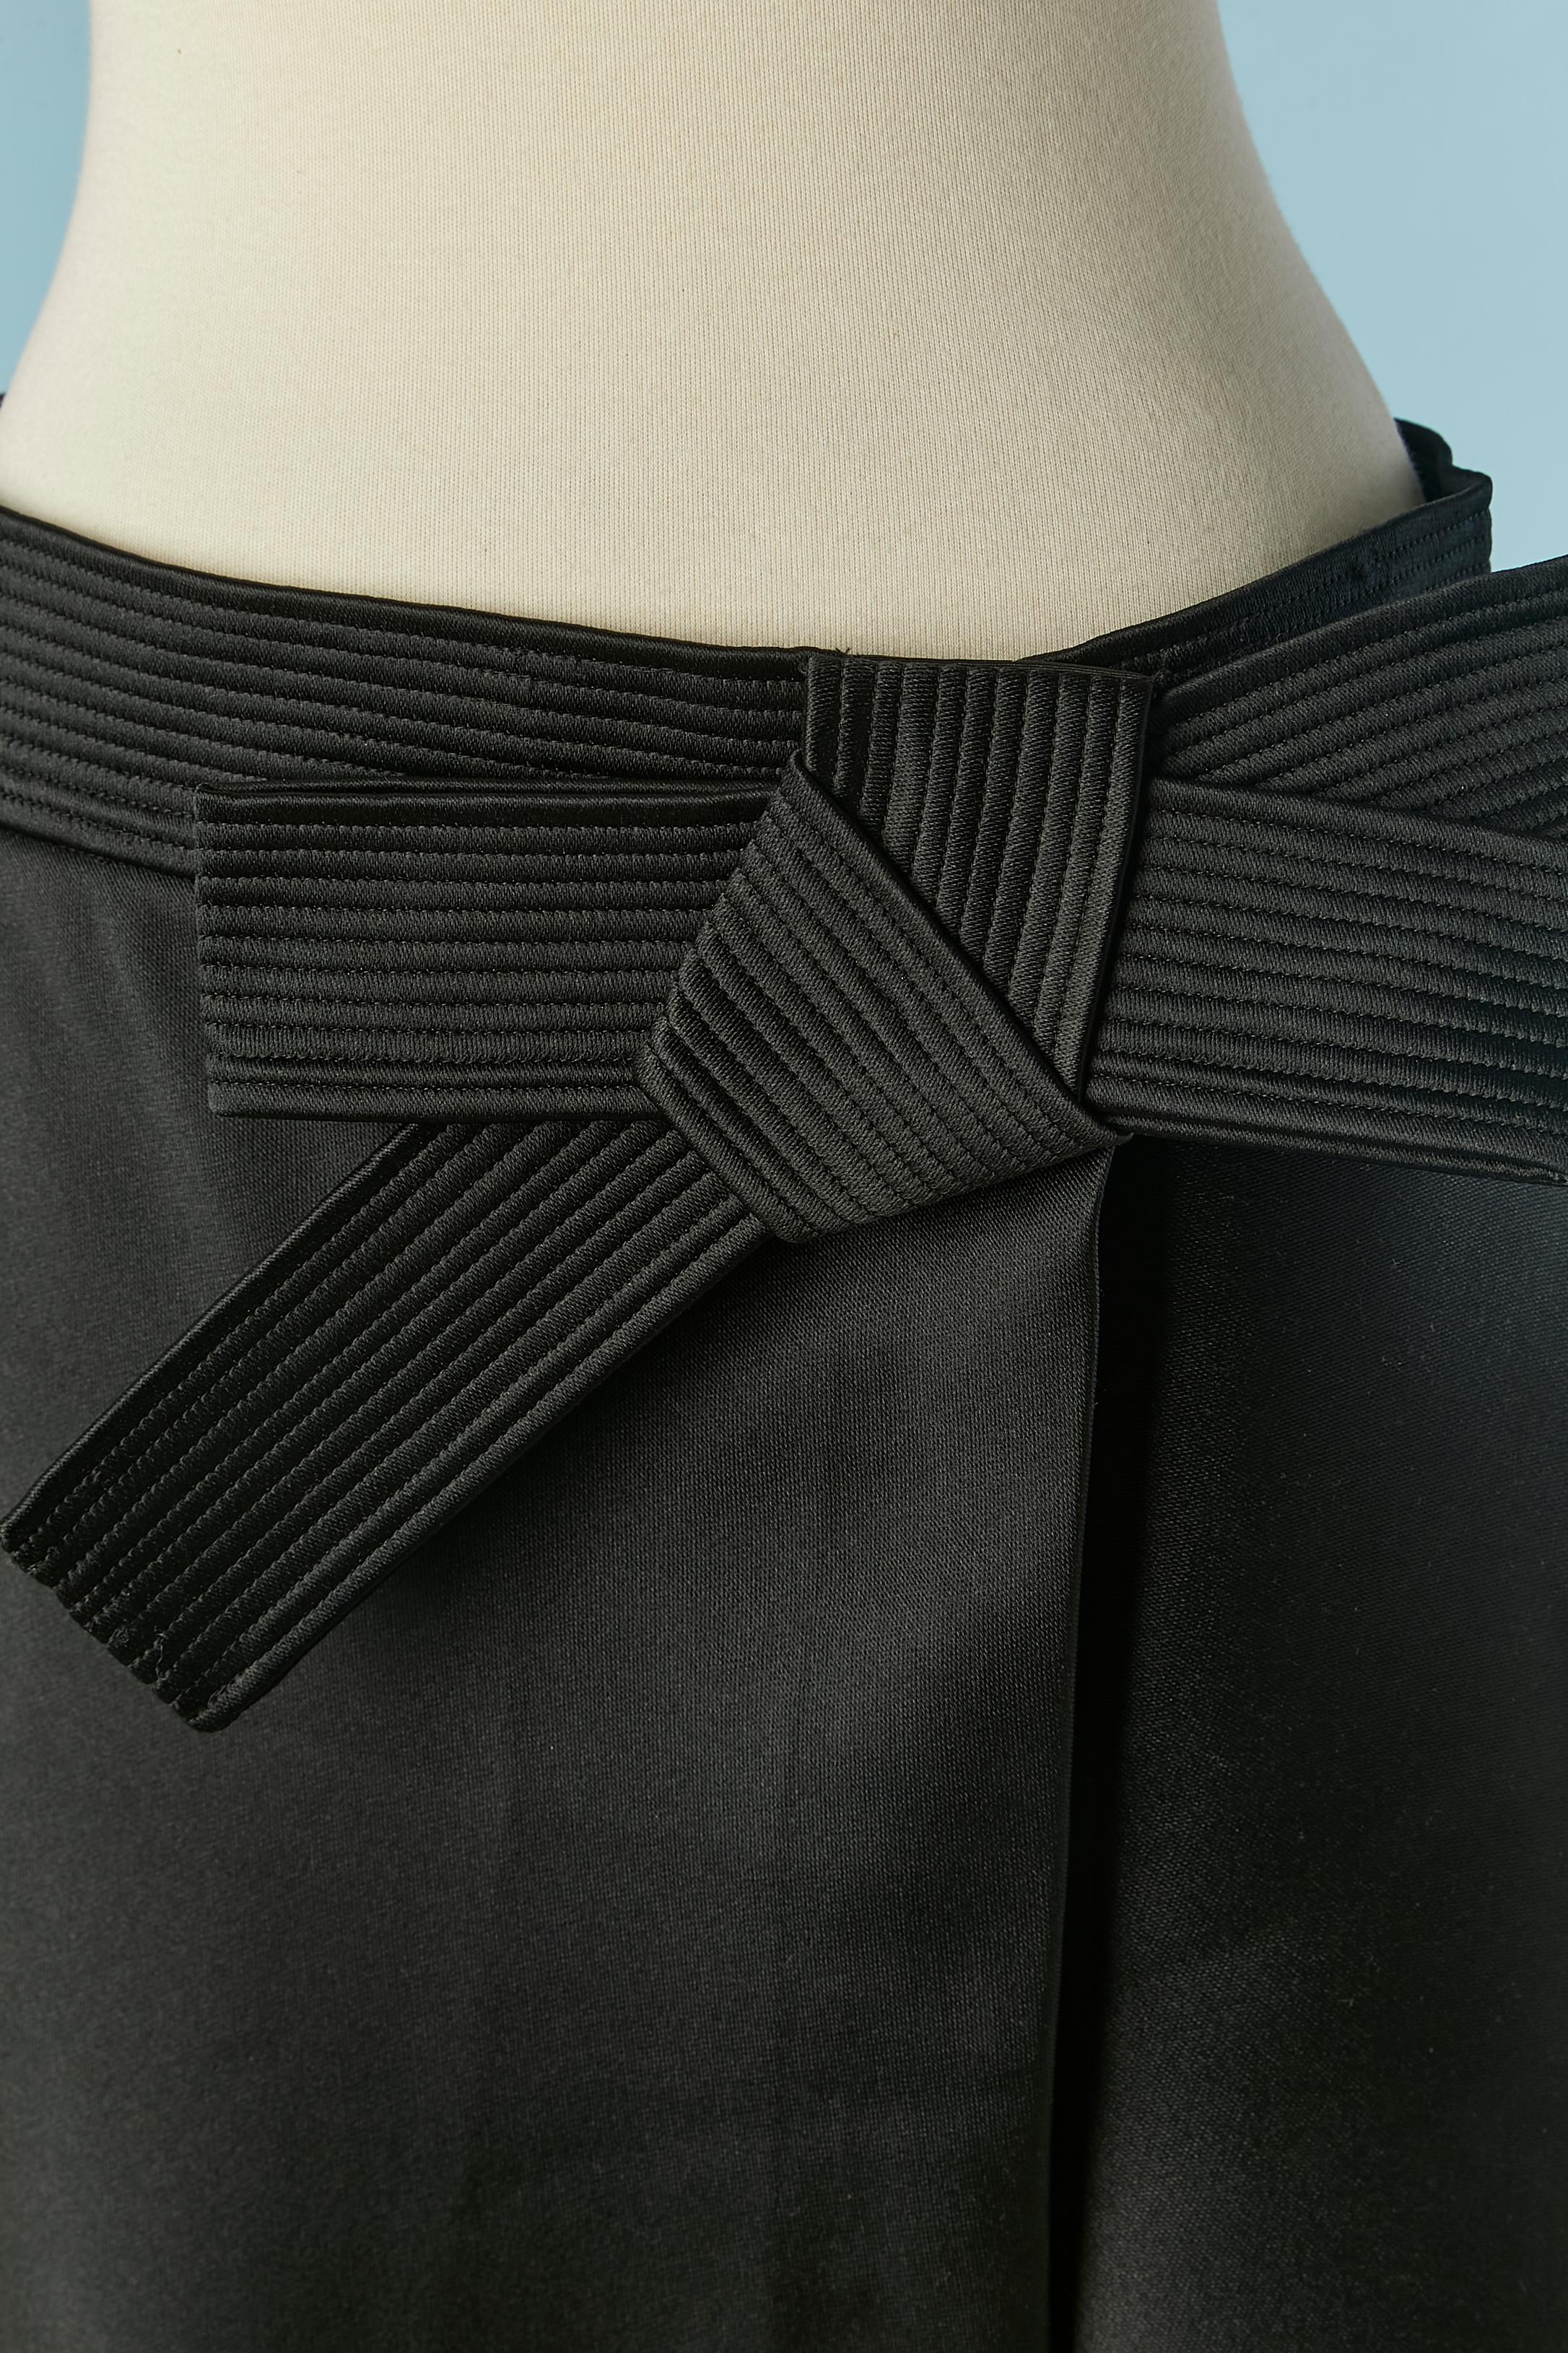 Black asymmetrical wrap skirt with bow. Fabric composition : 88% polyester, 12% silk. Hidden zip and snap closure in the front. Top-stitched decorative bow in the waist in the front.
Total lenght front= 60 cm
Total lenght back = 70 cm
SIZE 38 (Fr) M 